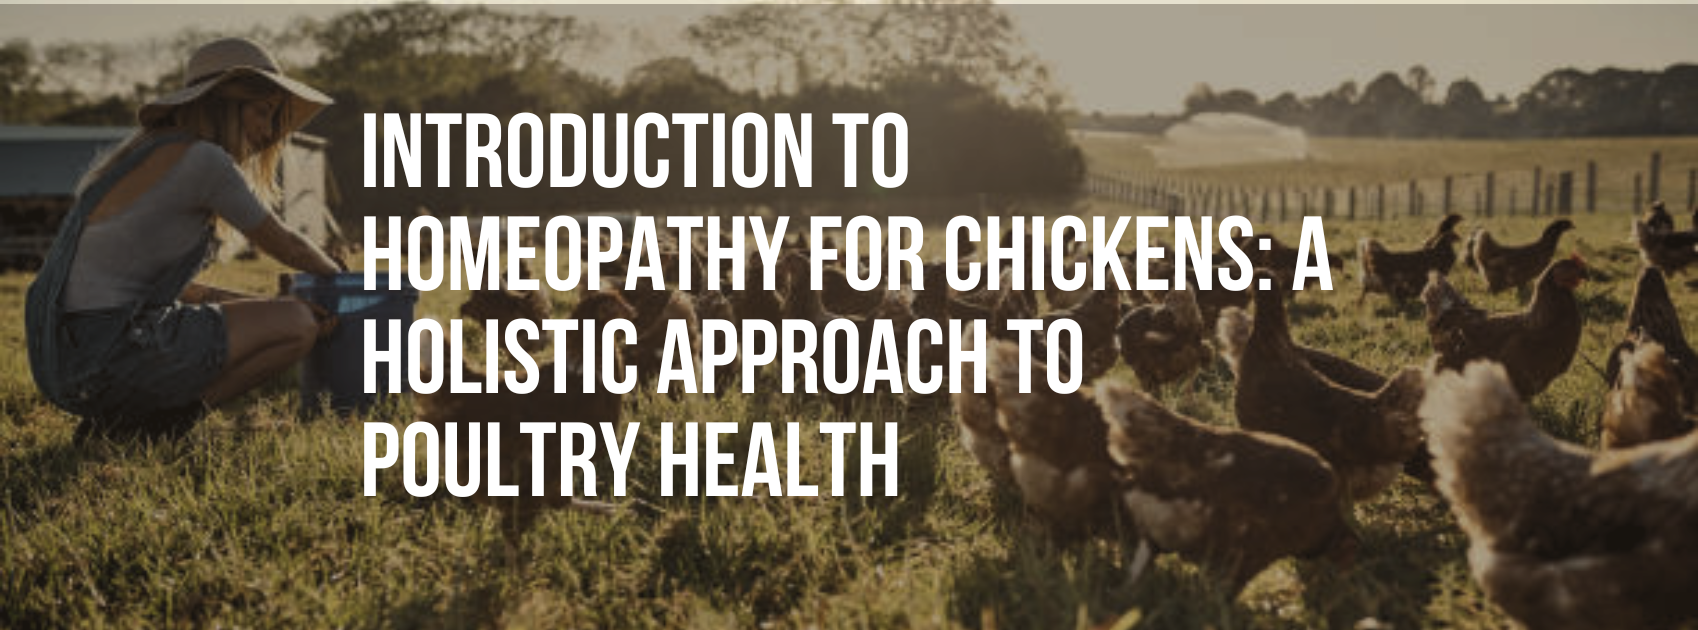 Introduction to Homeopathy for Chickens: A Holistic Approach to Poultry Health